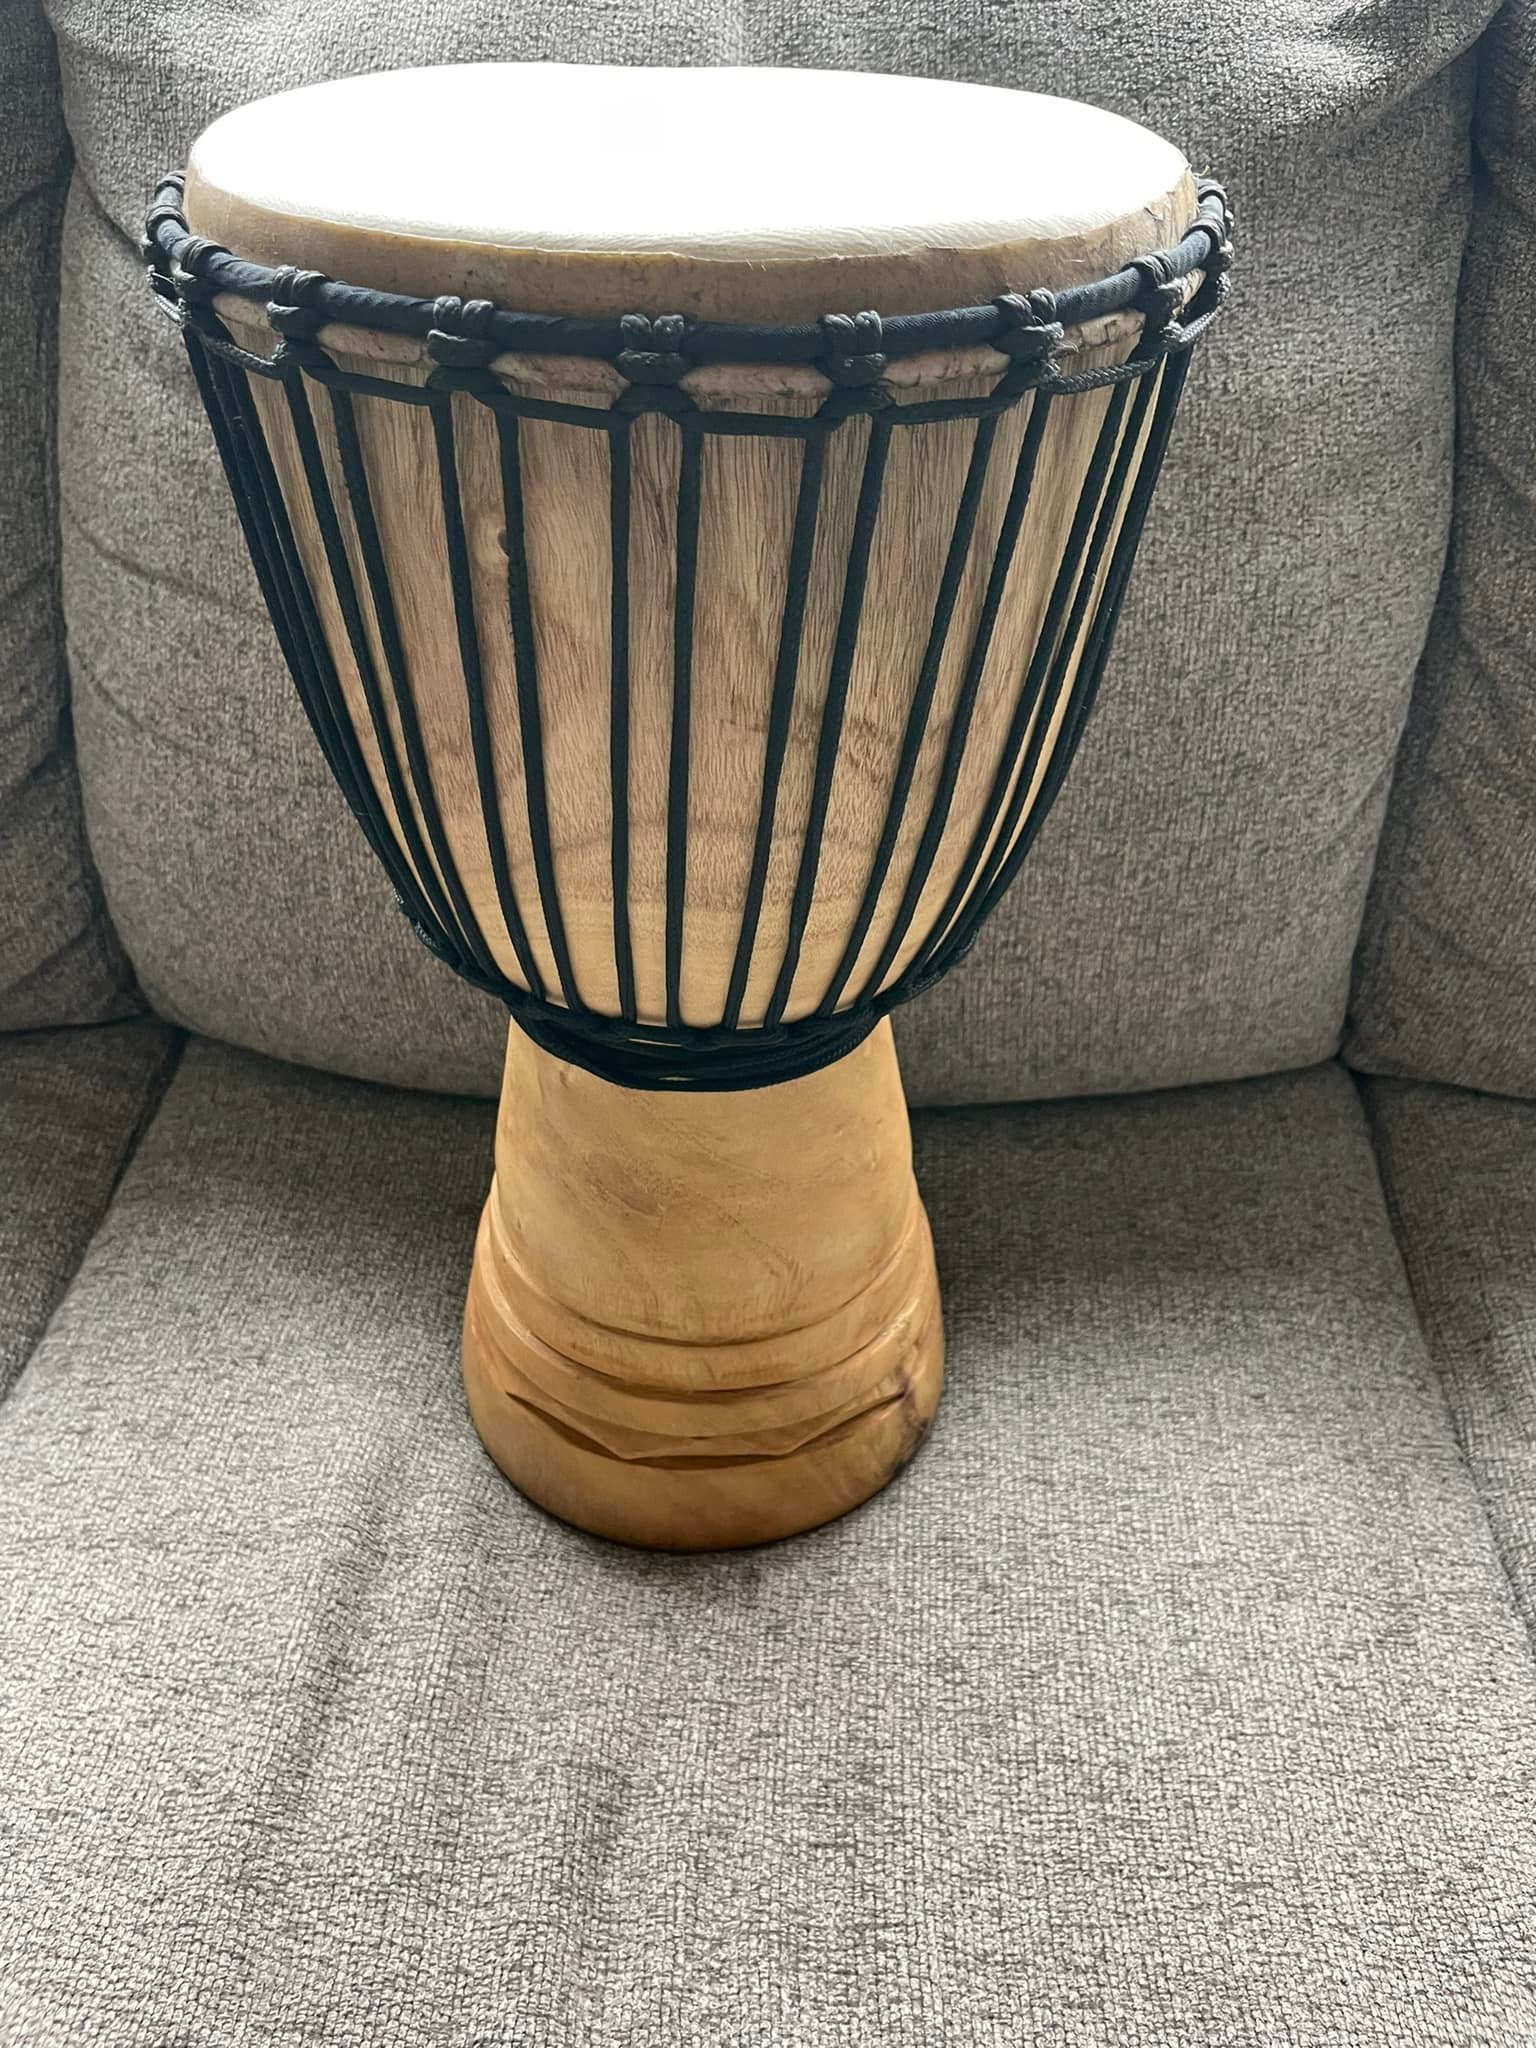 I got a new baby today🪘
Loki is so cute checking it out. 
Handcarved African Djembe that has a deep tone like the heart beat of Mother Earth. Getting ready to bring her up to the woods next weekend for retreat.